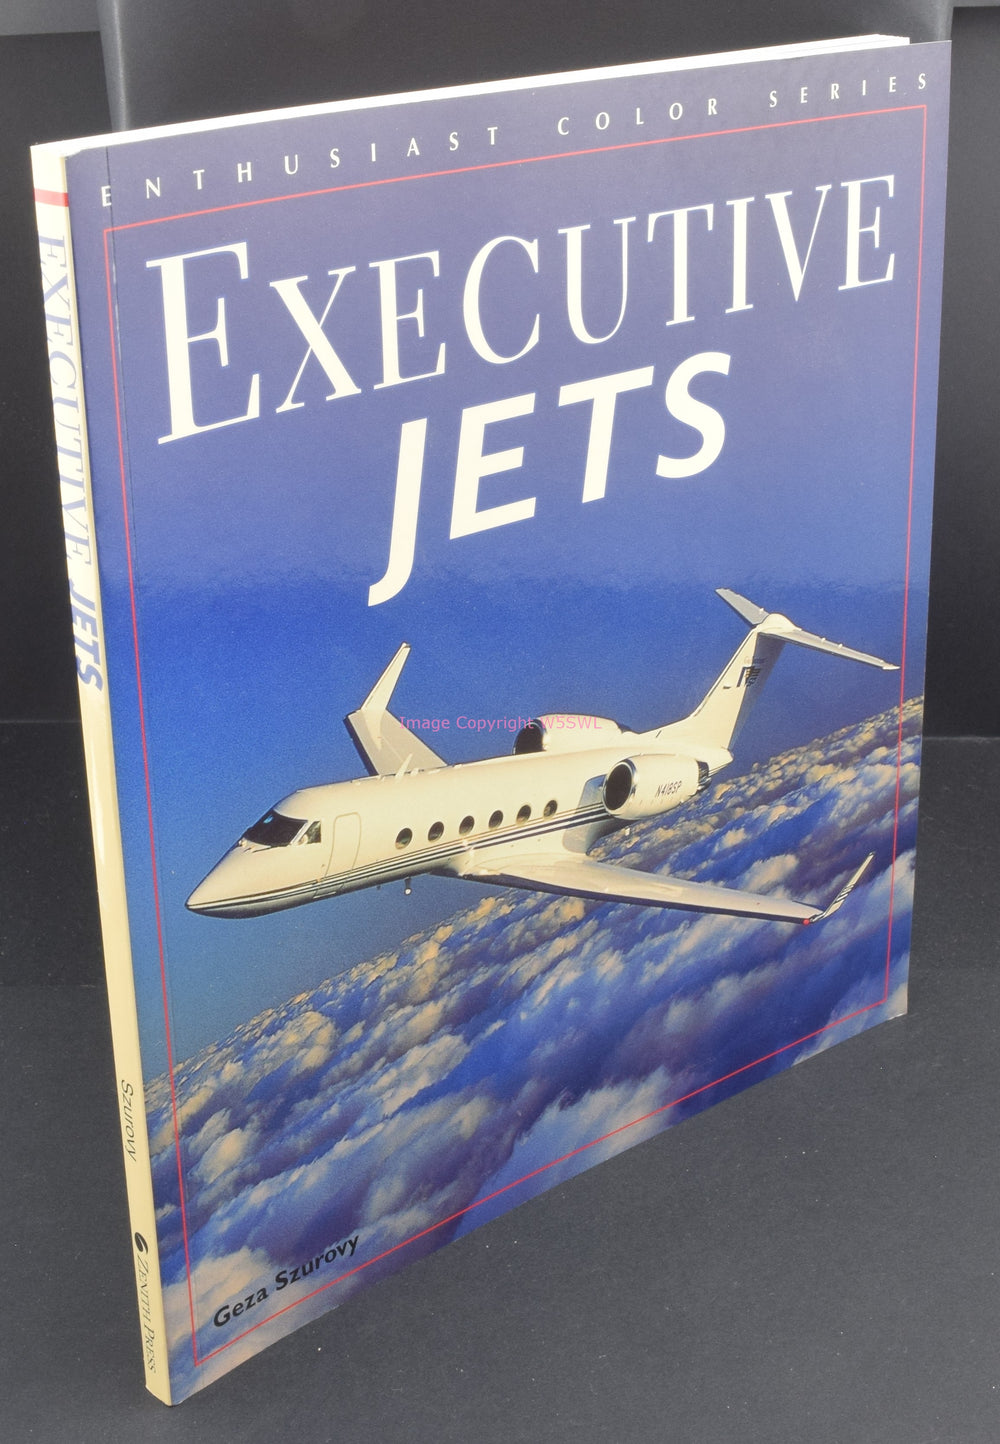 Executive Jets by Geza Szurovy - Dave's Hobby Shop by W5SWL